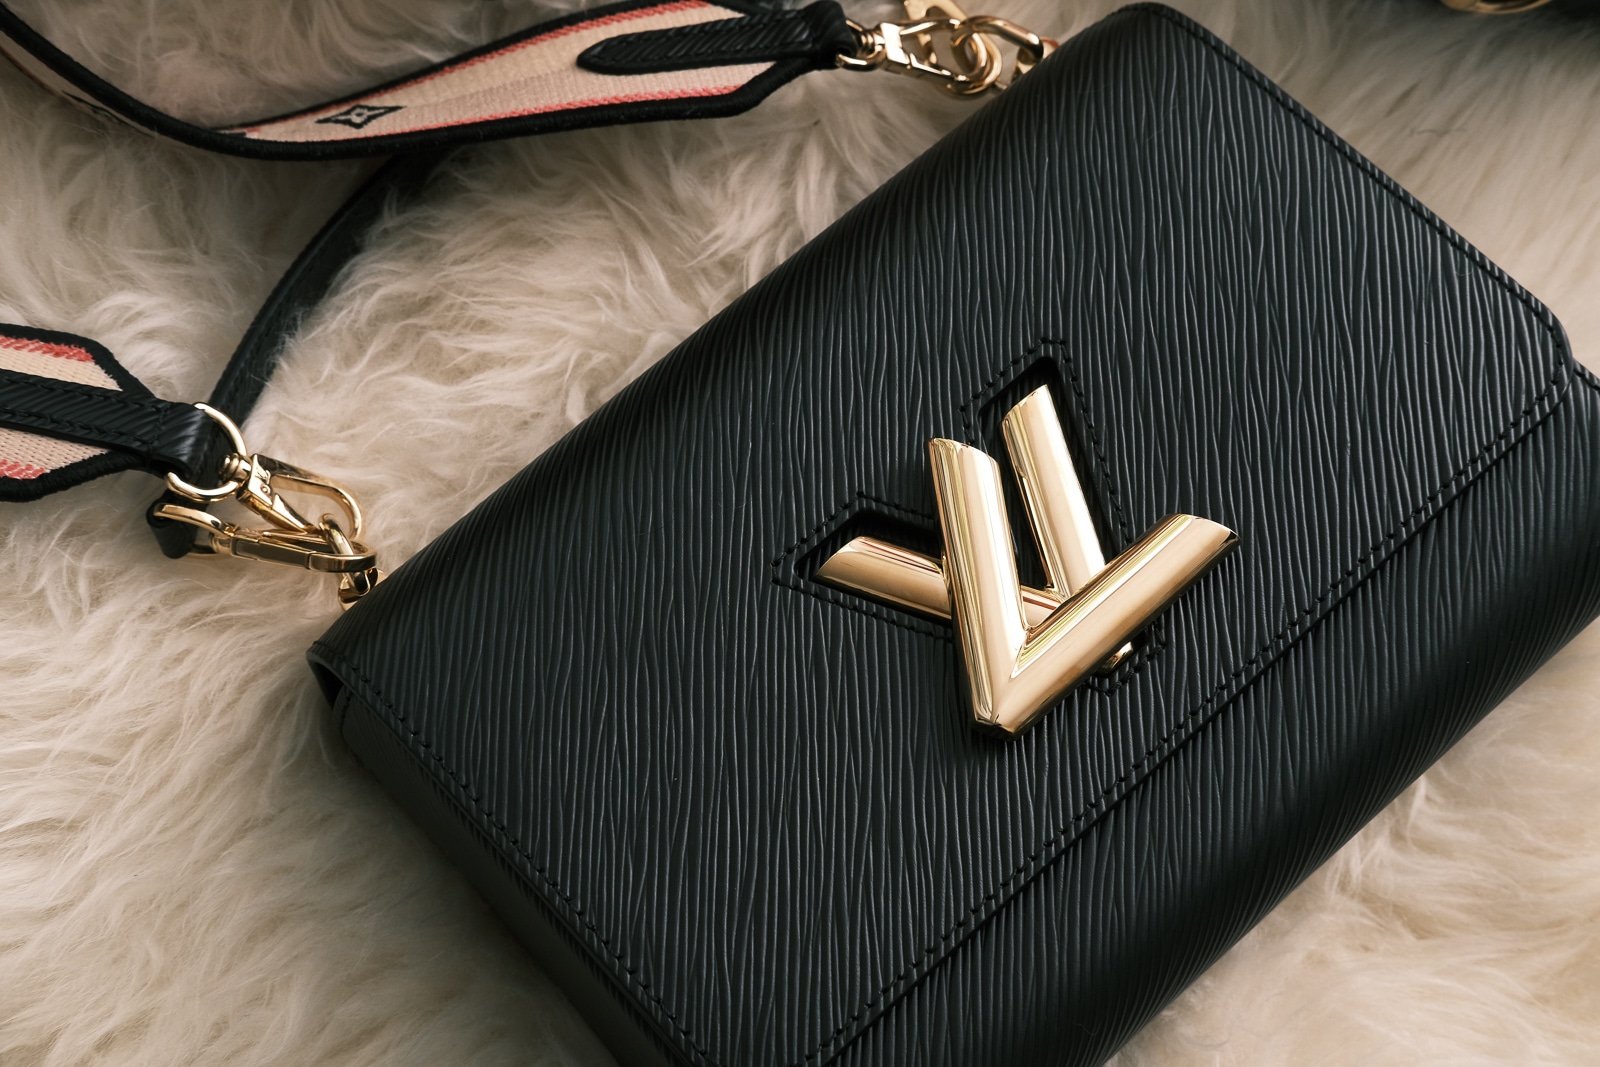 These New Louis Vuitton Twist Bags Are Versatile and Eye-Catching